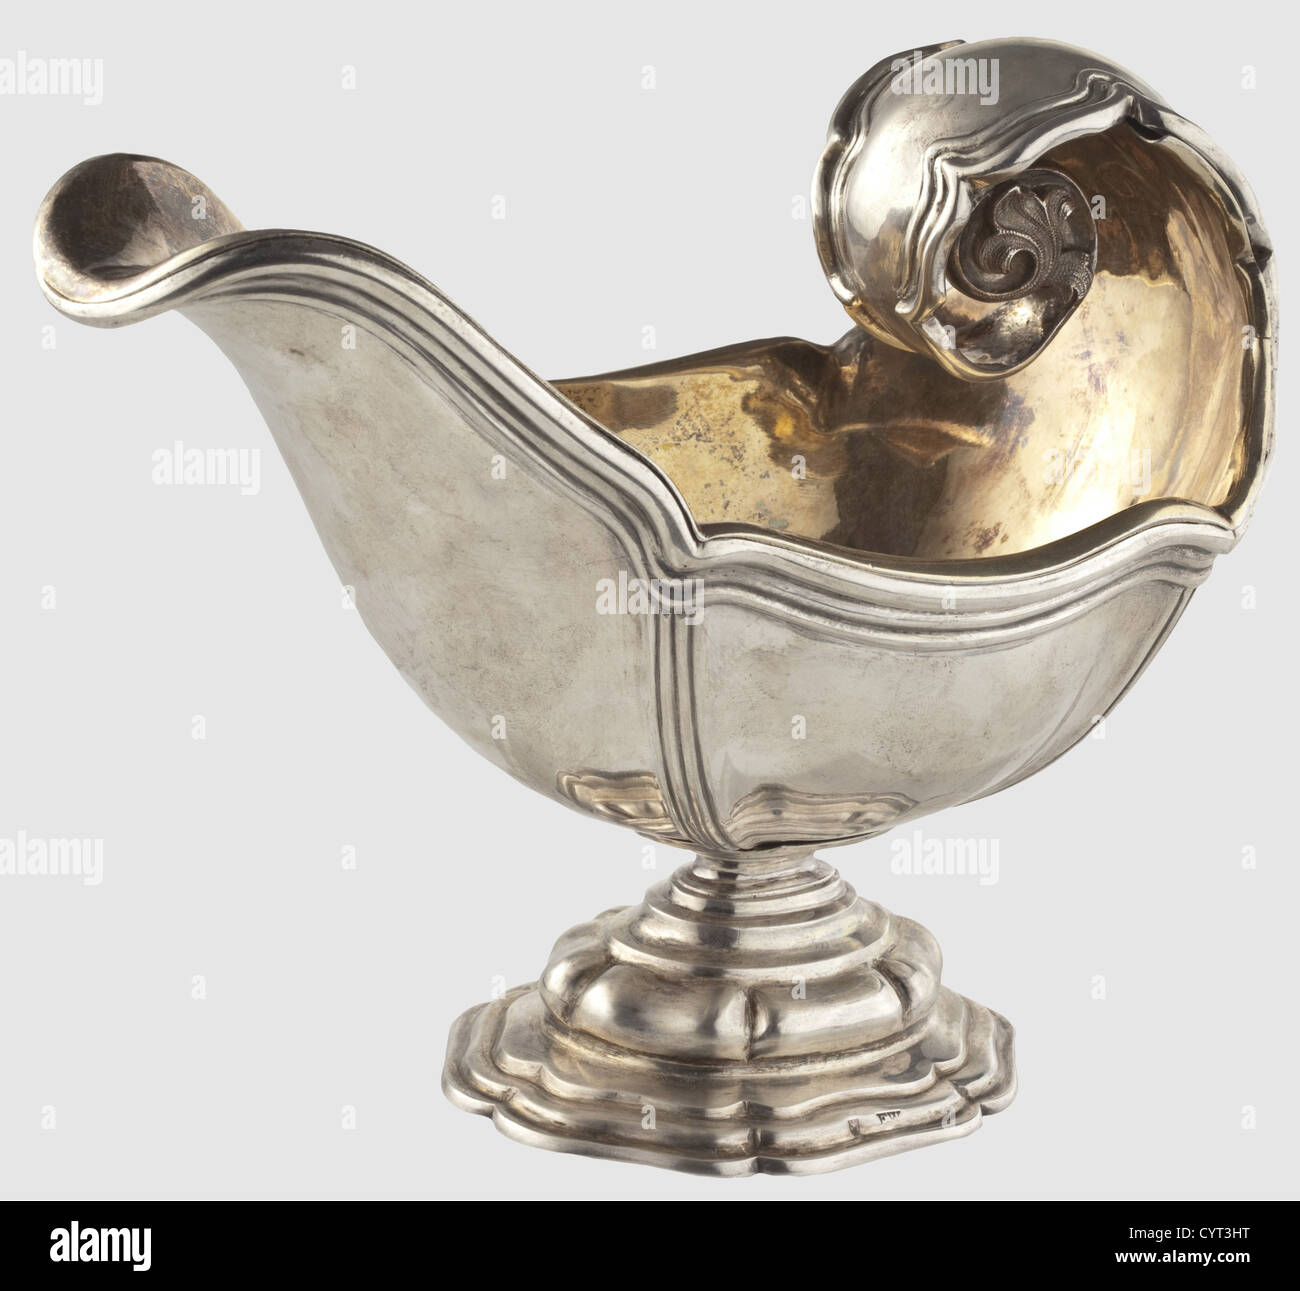 King Ludwig II of Bavaria(1845 - 1886),a silver sauce boat from the King's table service By Court Jeweller Eduard Wollenweber,Munich around 1870/80.Silver with triple banded rim decoration and an incurved handle stamped with decorative leaves.There is a mirror monogram 'L' beneath a Bavarian royal crown,resembling the monogram of the Sun King Louis XIV,engraved on the back of the grip.Gilt silver,turned under insert(loose at one point).'Wollenweber' masters mark and the 'Münchner Kindl' hallmark.The stepped base is marked 'E.W.' and has another City,Additional-Rights-Clearences-Not Available Stock Photo